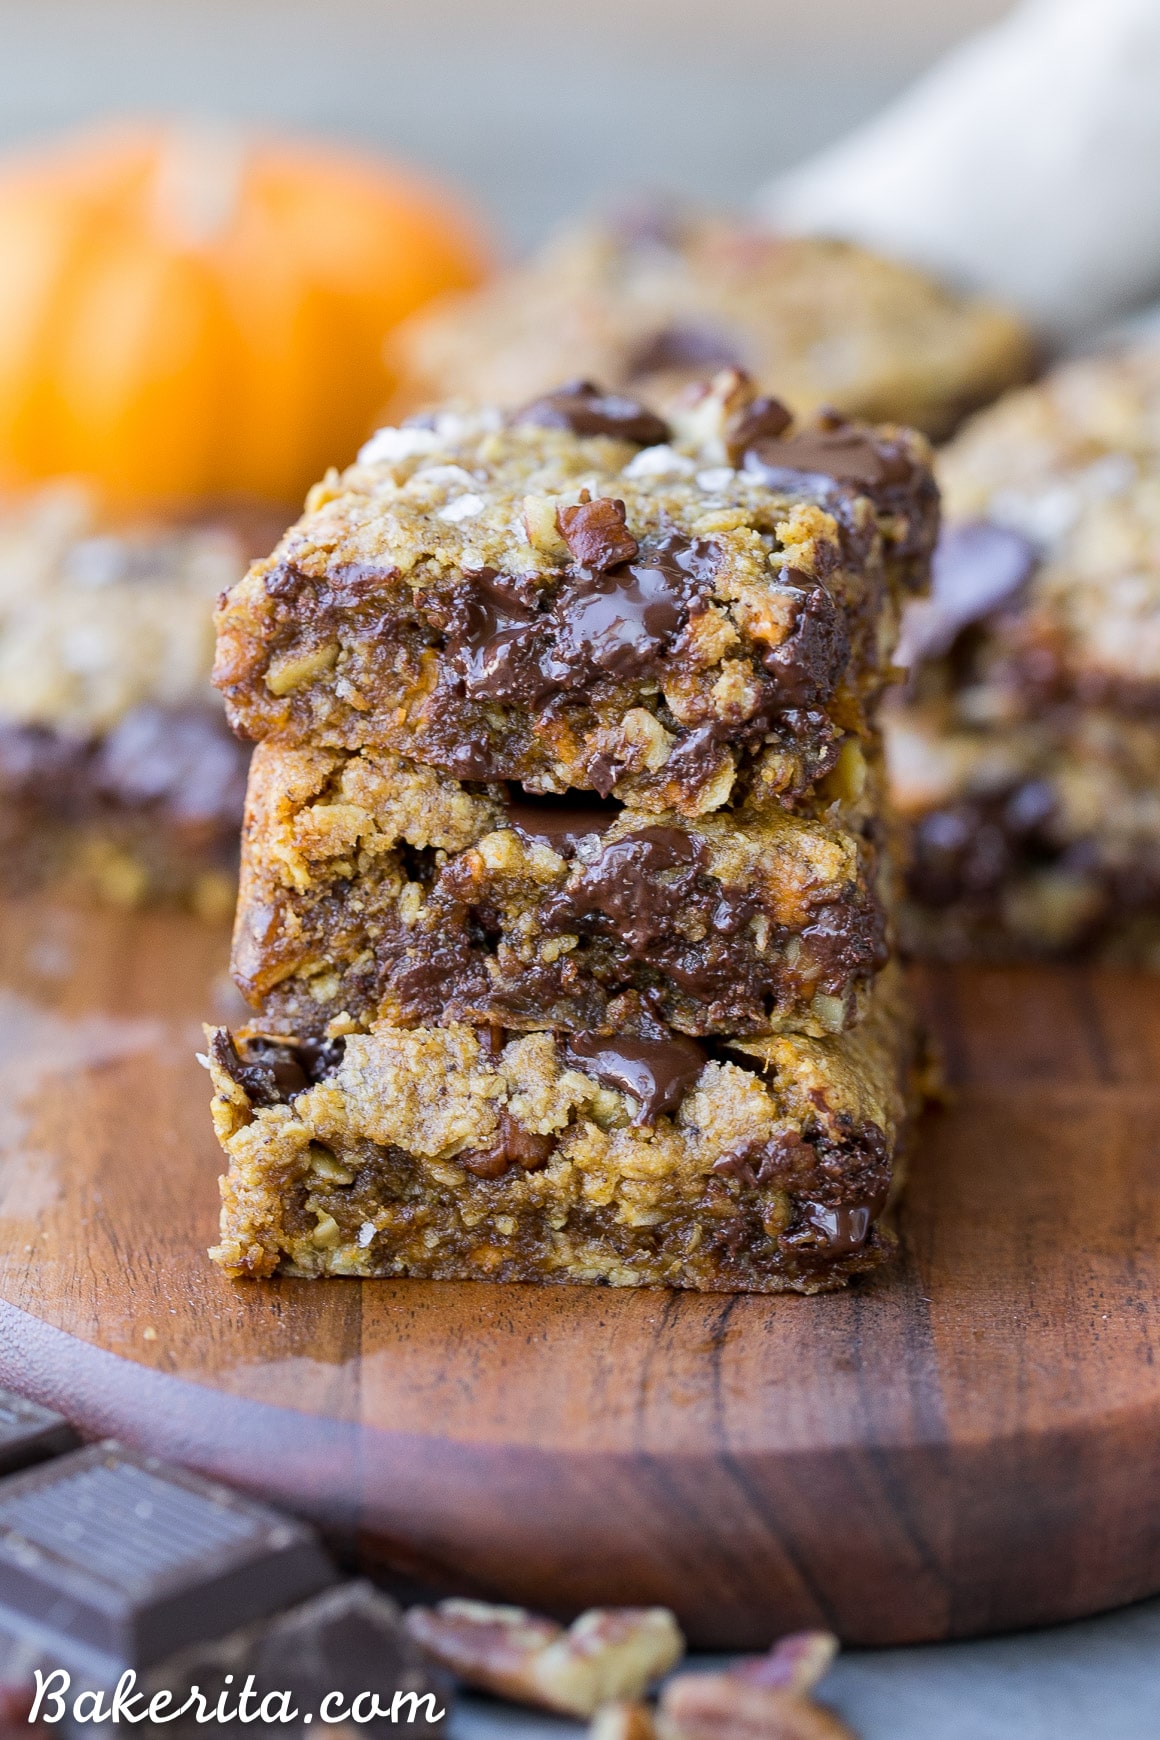 These Pumpkin Oatmeal Scotchie Bars with Chocolate Chips + Pecans are soft, gooey, and absolutely irresistible! These decadent dessert bars couldn't be easier to make.